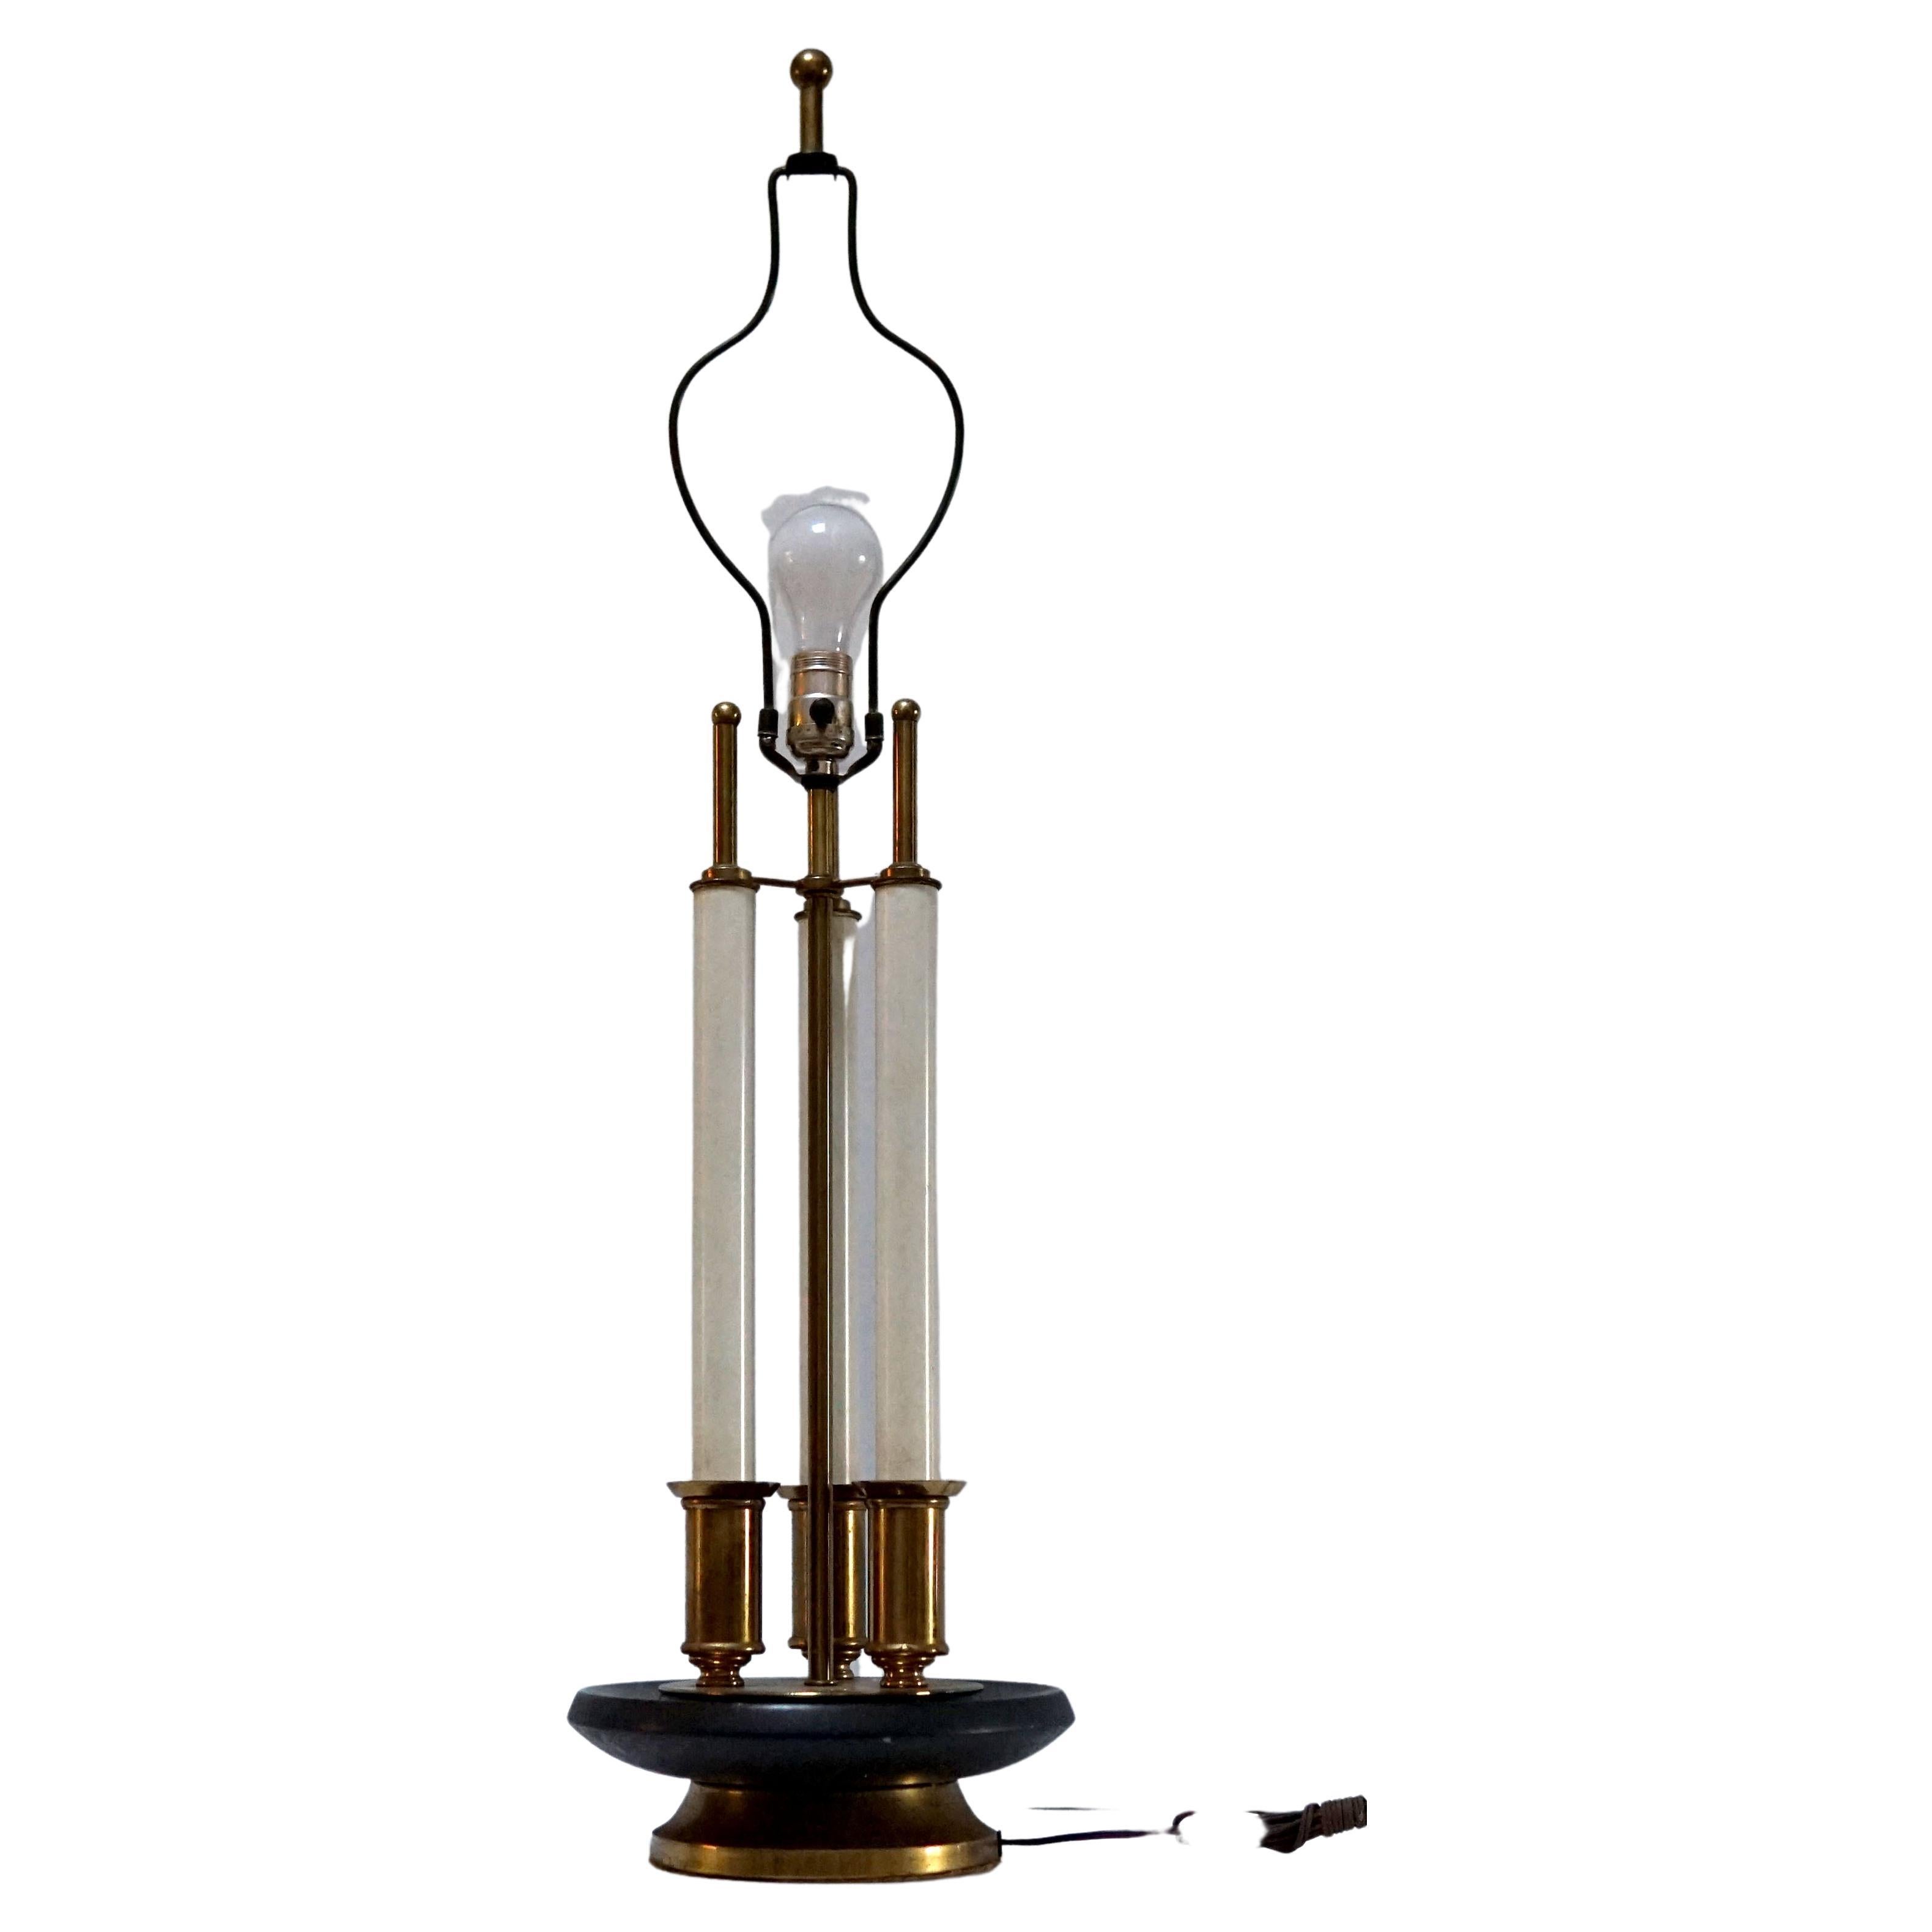 This is the epitome of statement lighting with its elegant Stiffel touches in brass with the high-style modernist design of Tommi Parzinger. Parzinger maintained a studio in New York during his lifetime and designed furniture and partnered with